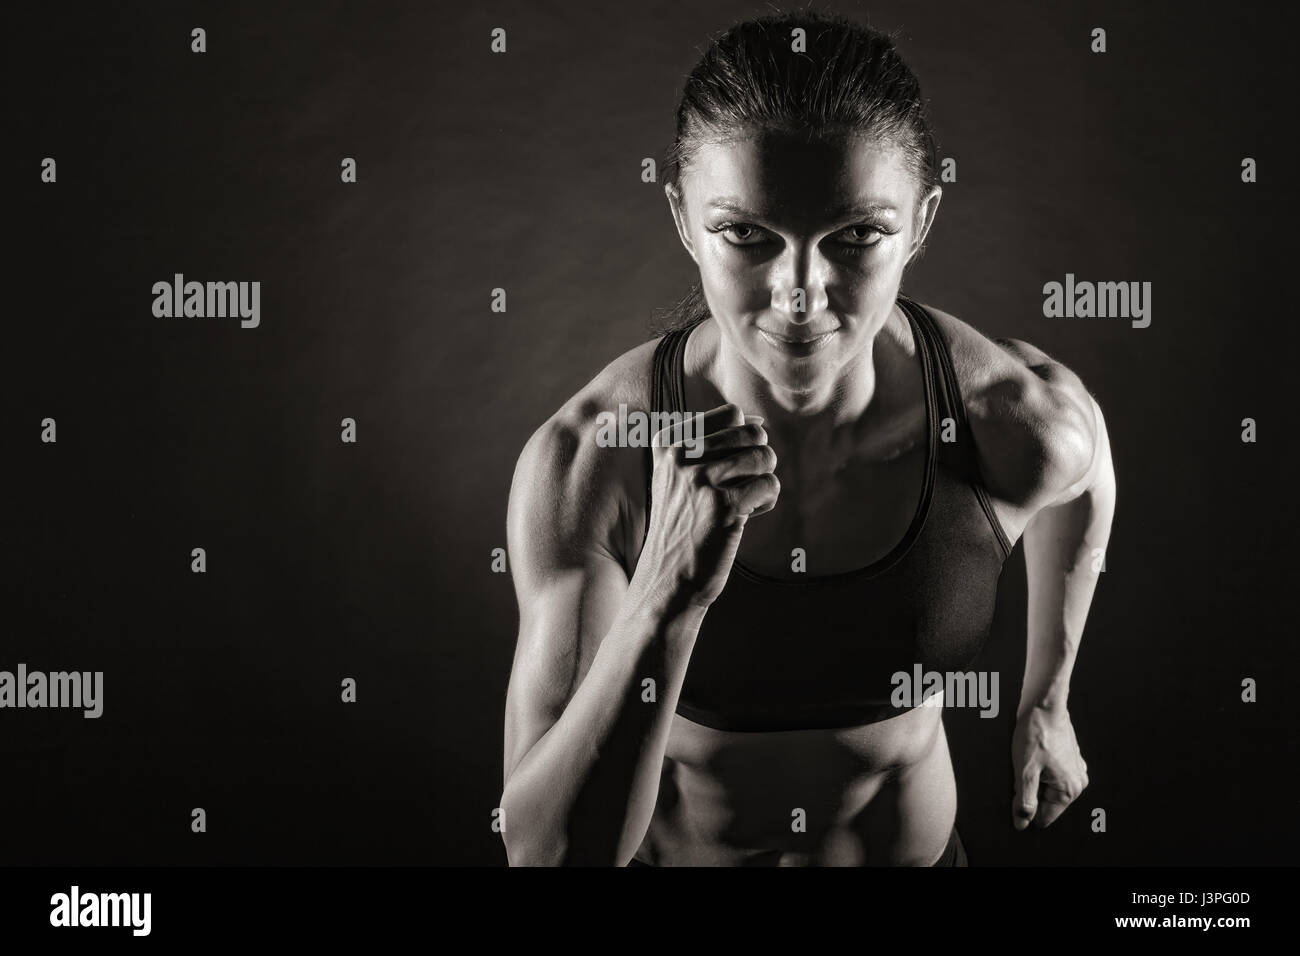 Woman running on a dark background. Front view Stock Photo